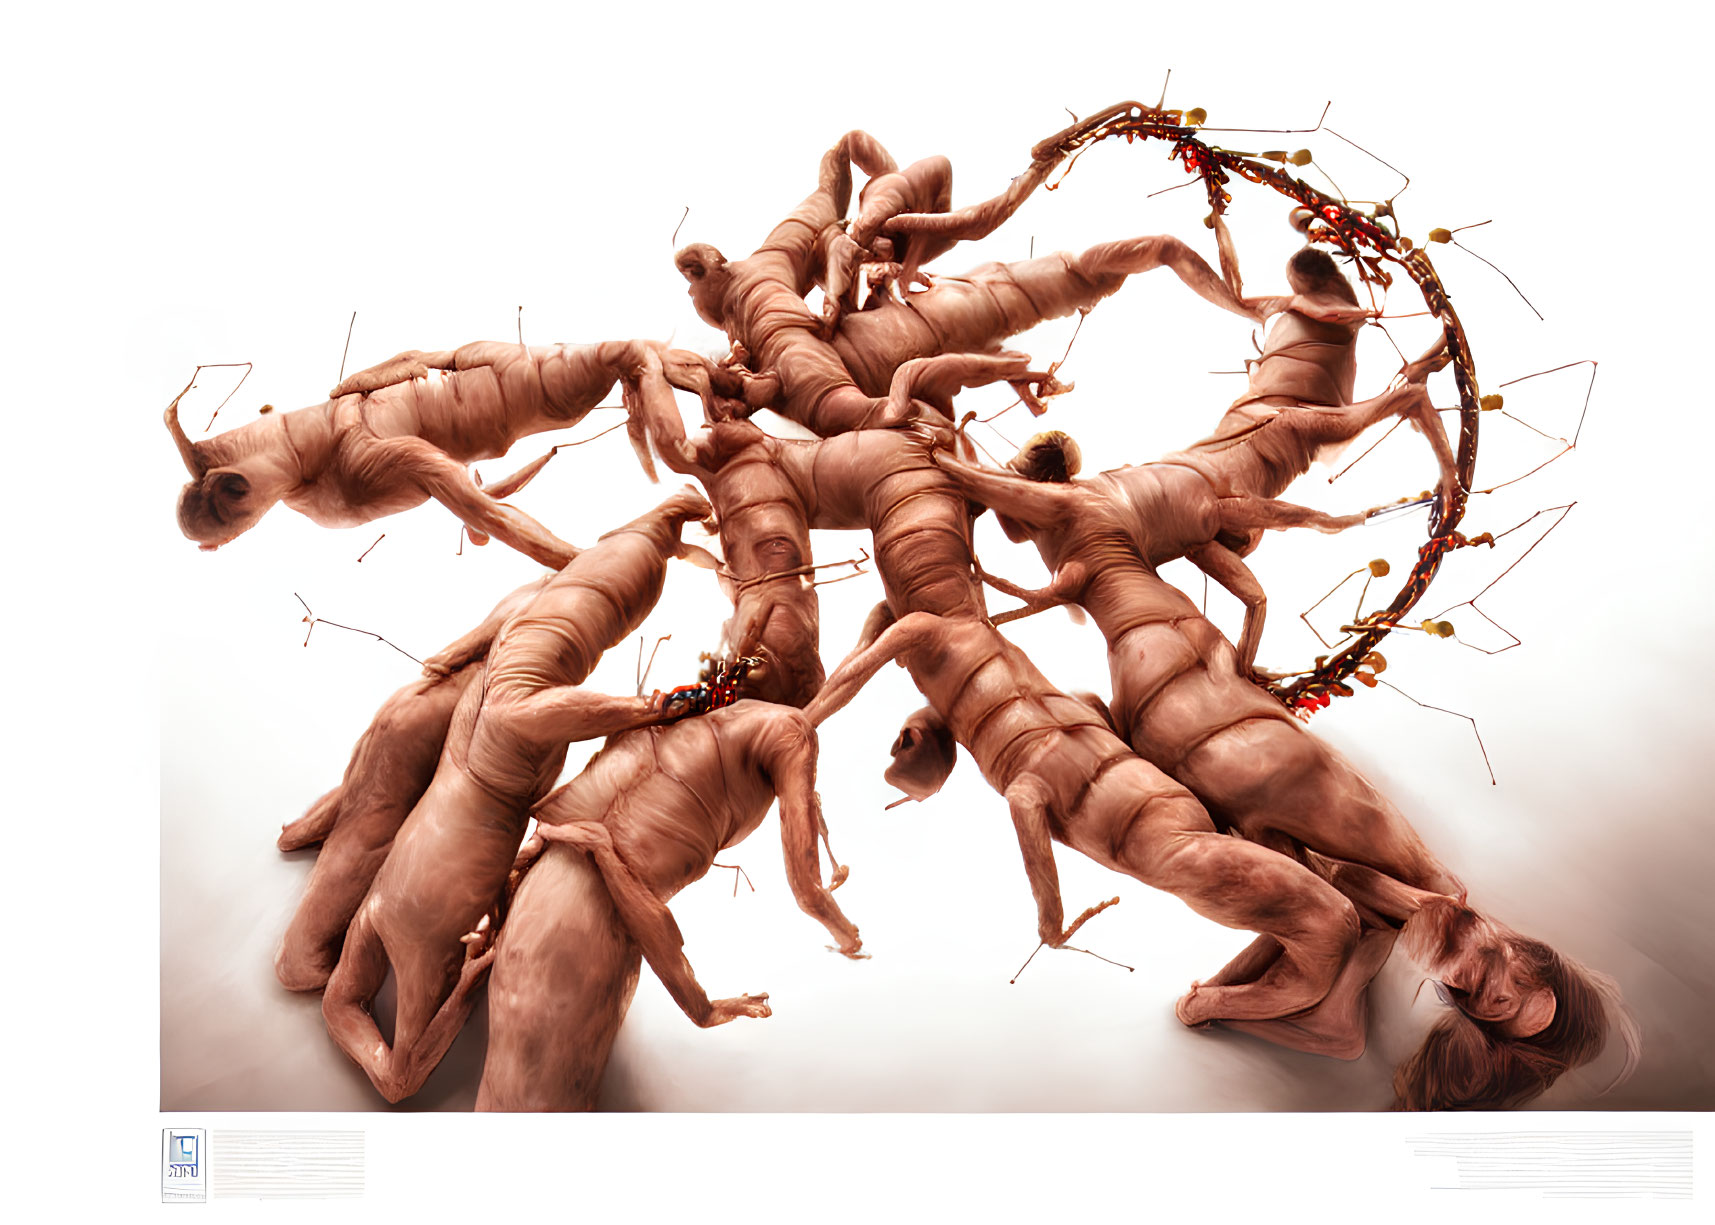 Abstract digital artwork: Human figures contorted into tree-like structure